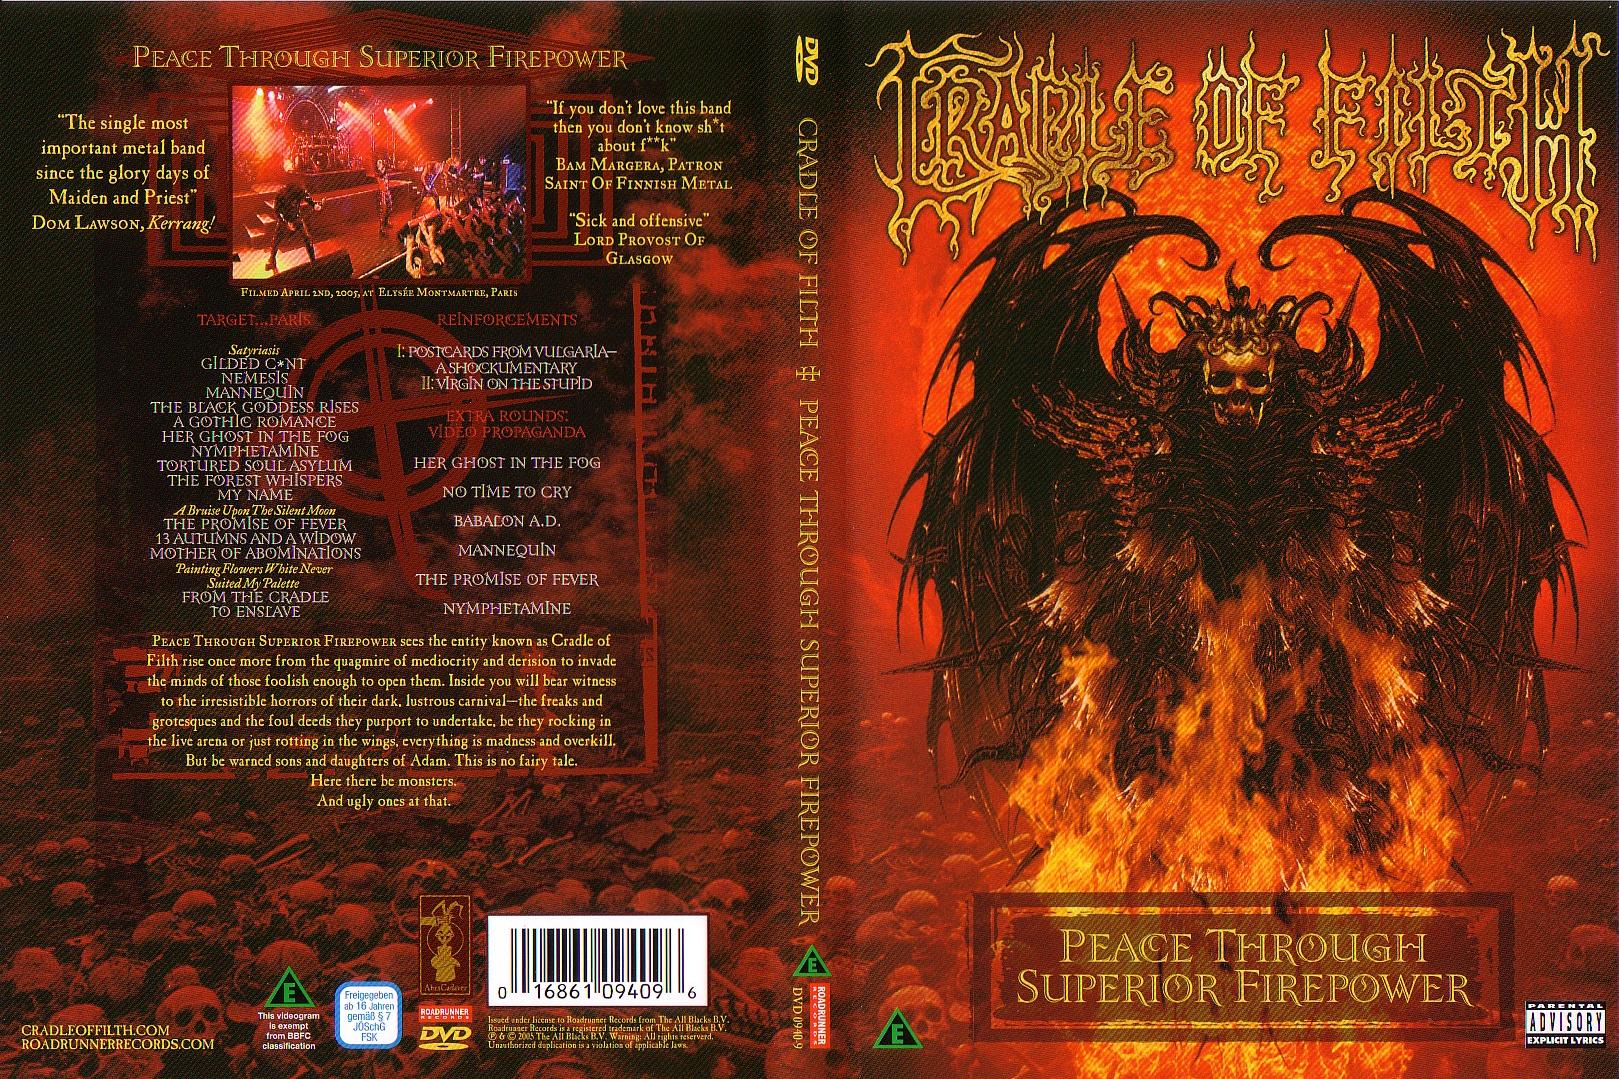 Jaquette DVD Cradle of Filth Peace Through Superior Firepower